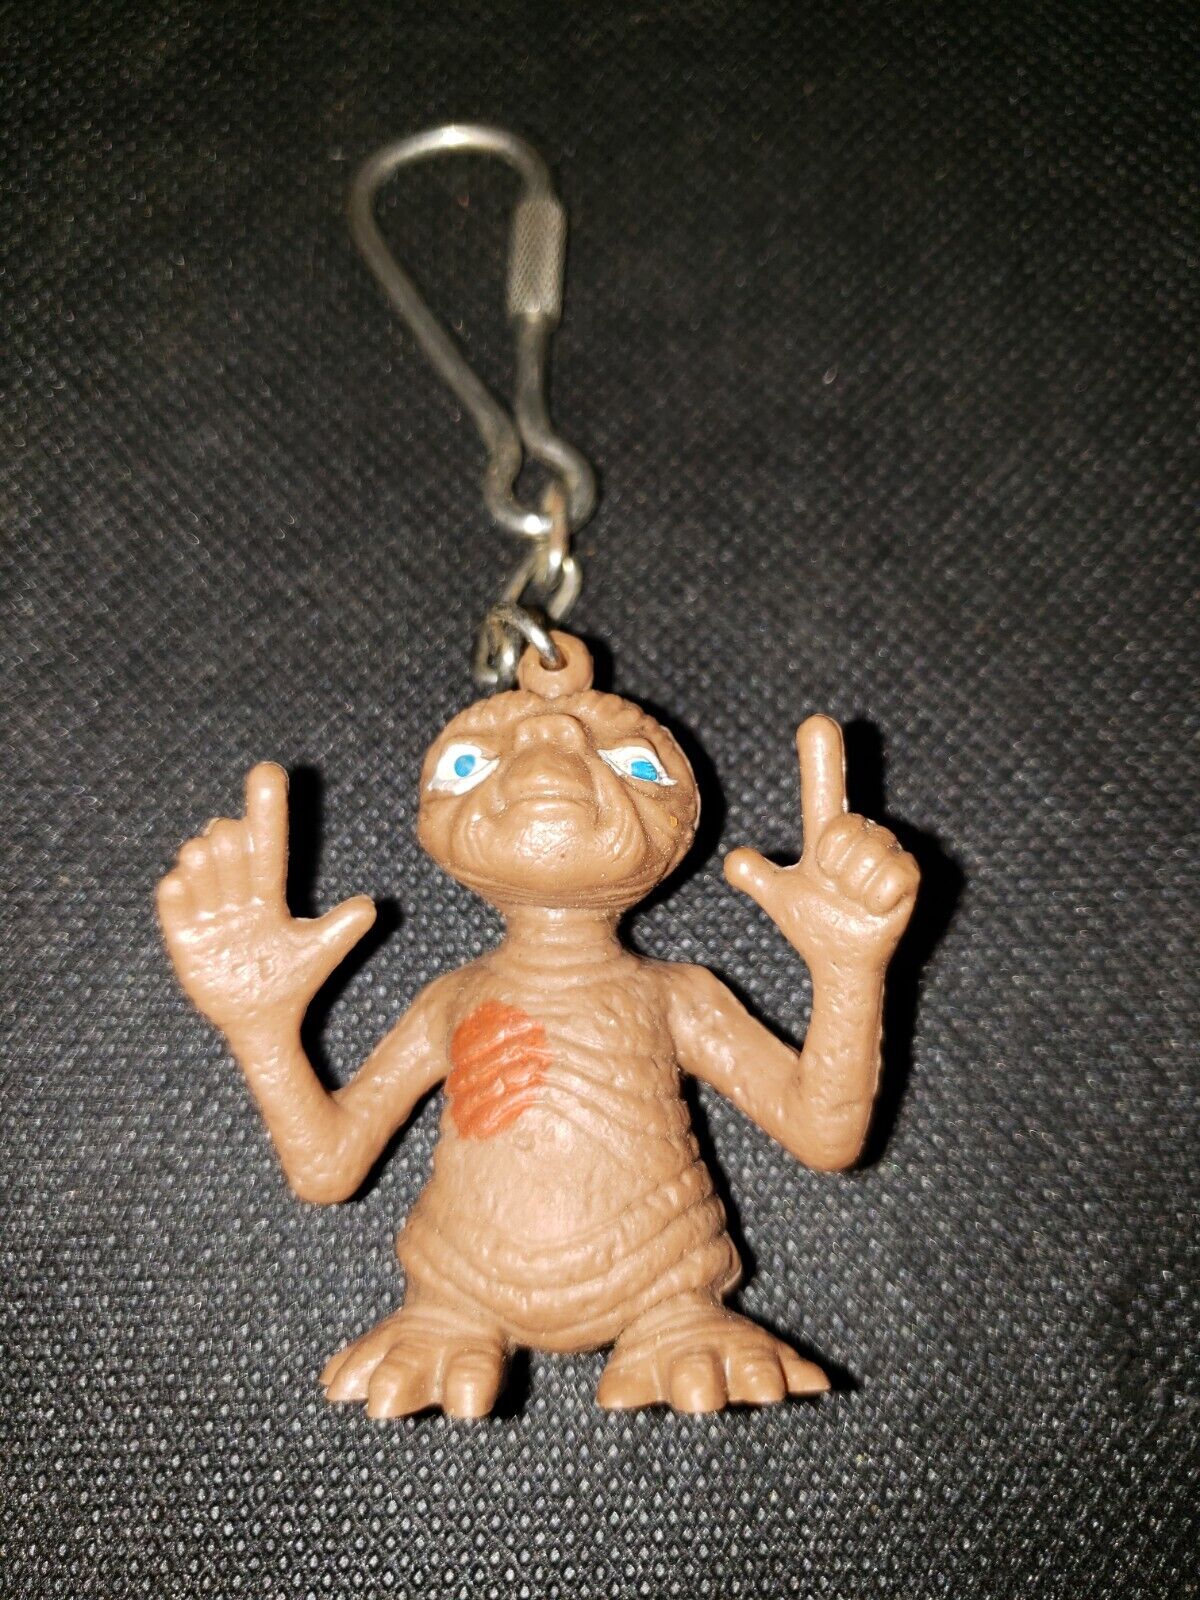 Vintage ET Keychain 💥FREE SHIPPING💥